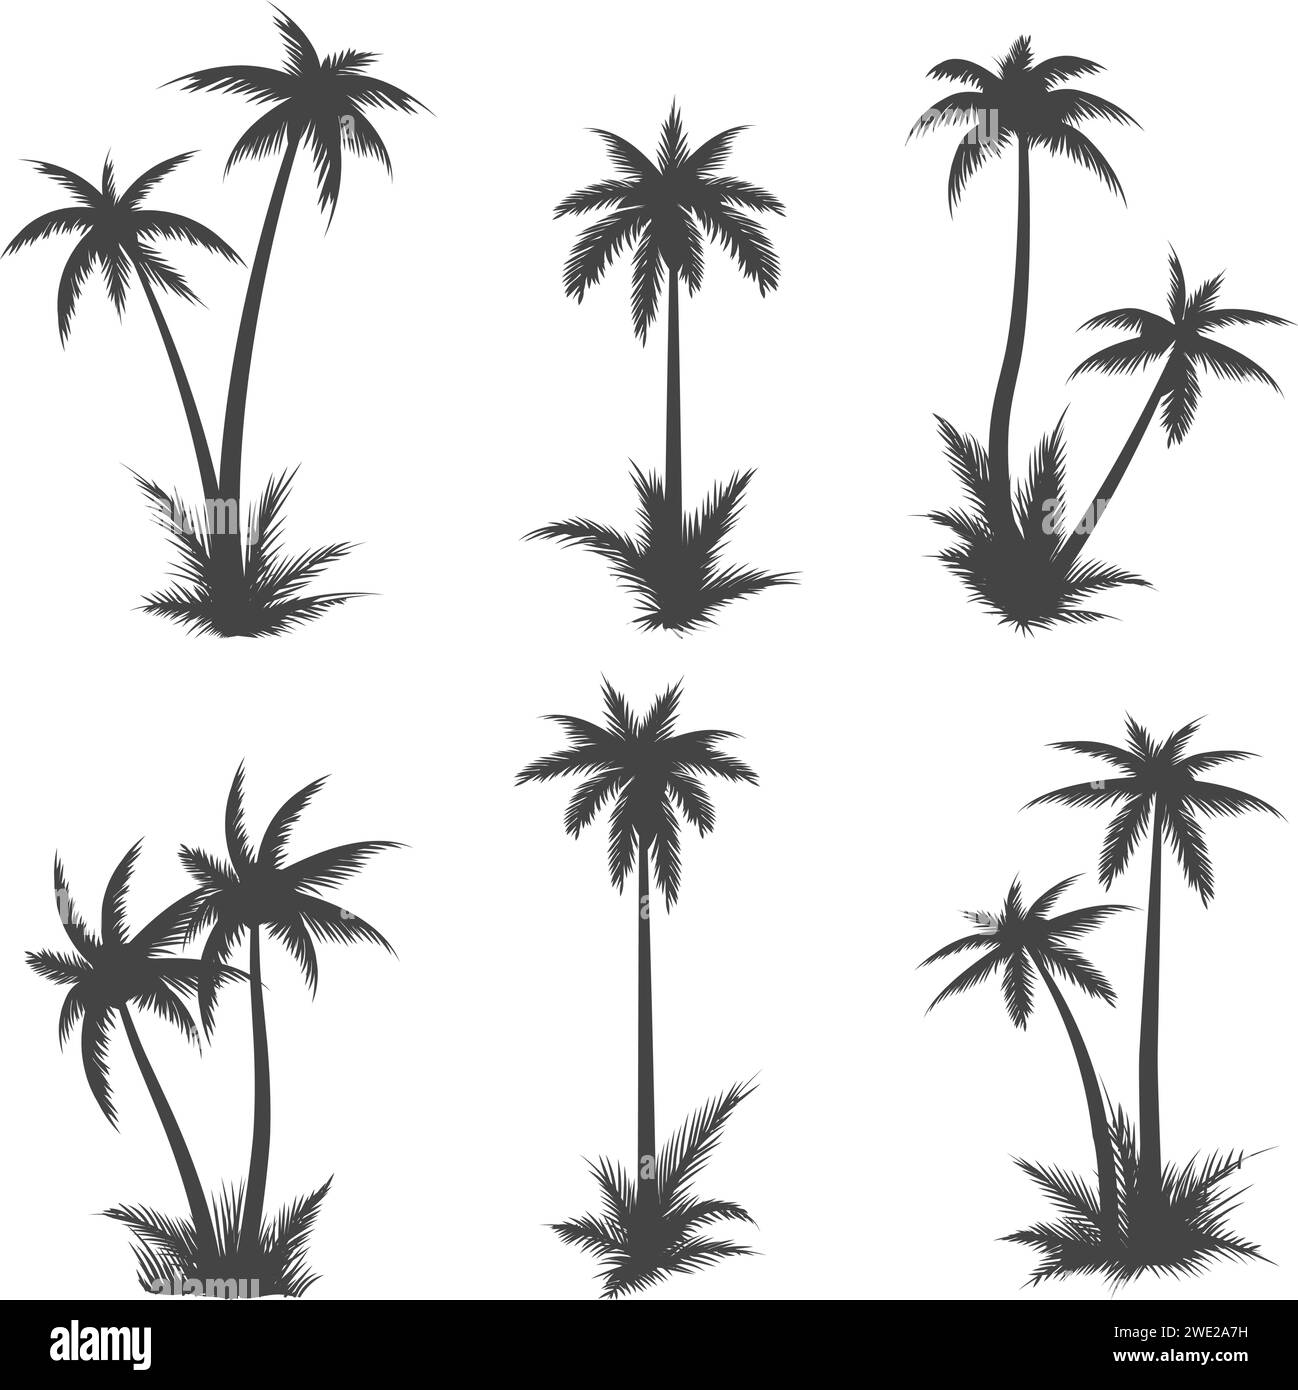 Palm tree silhouettes Stock Vector